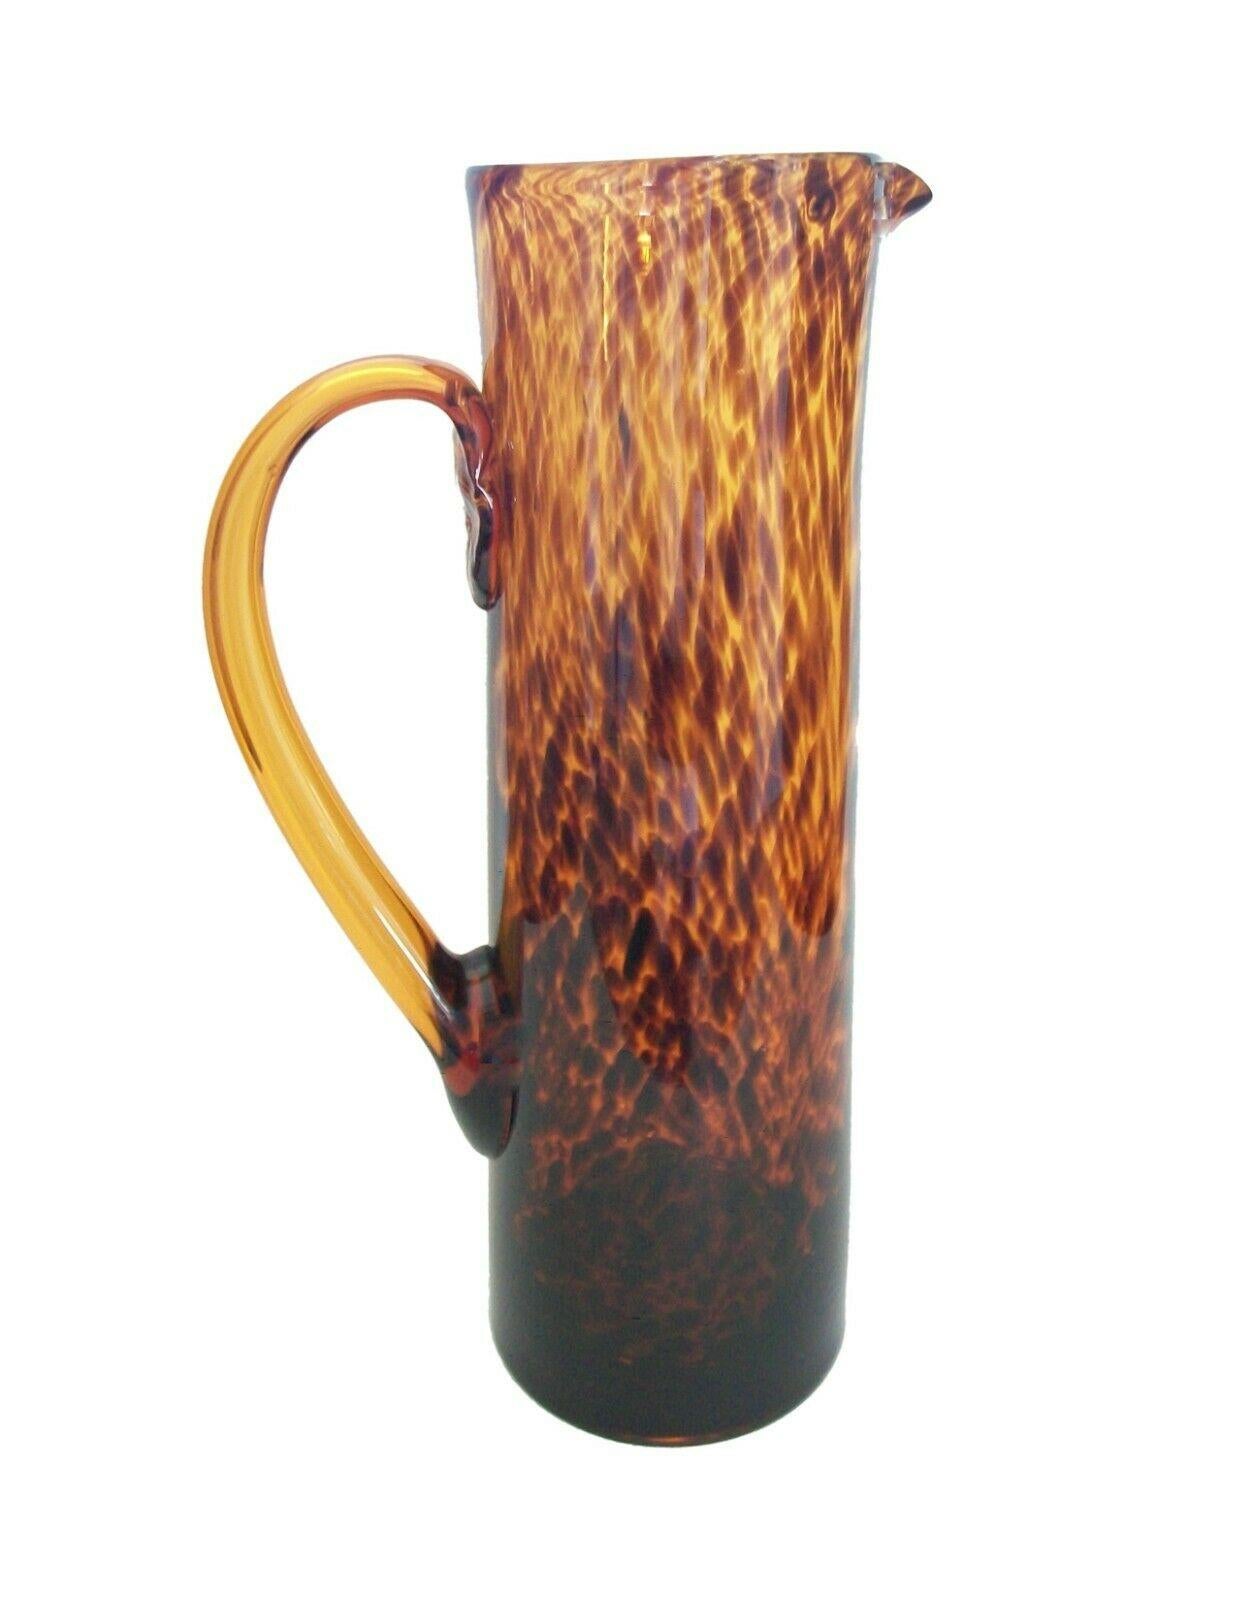 CHRISTIAN DIOR - EMPOLI (Manufactured in Italy (Tuscany) for Christian Dior Home) - Large and exceptional Mid Century tortoiseshell glass pitcher / vase - hand made / mouth blown with striking brown and amber patterned glass - hollow amber glass